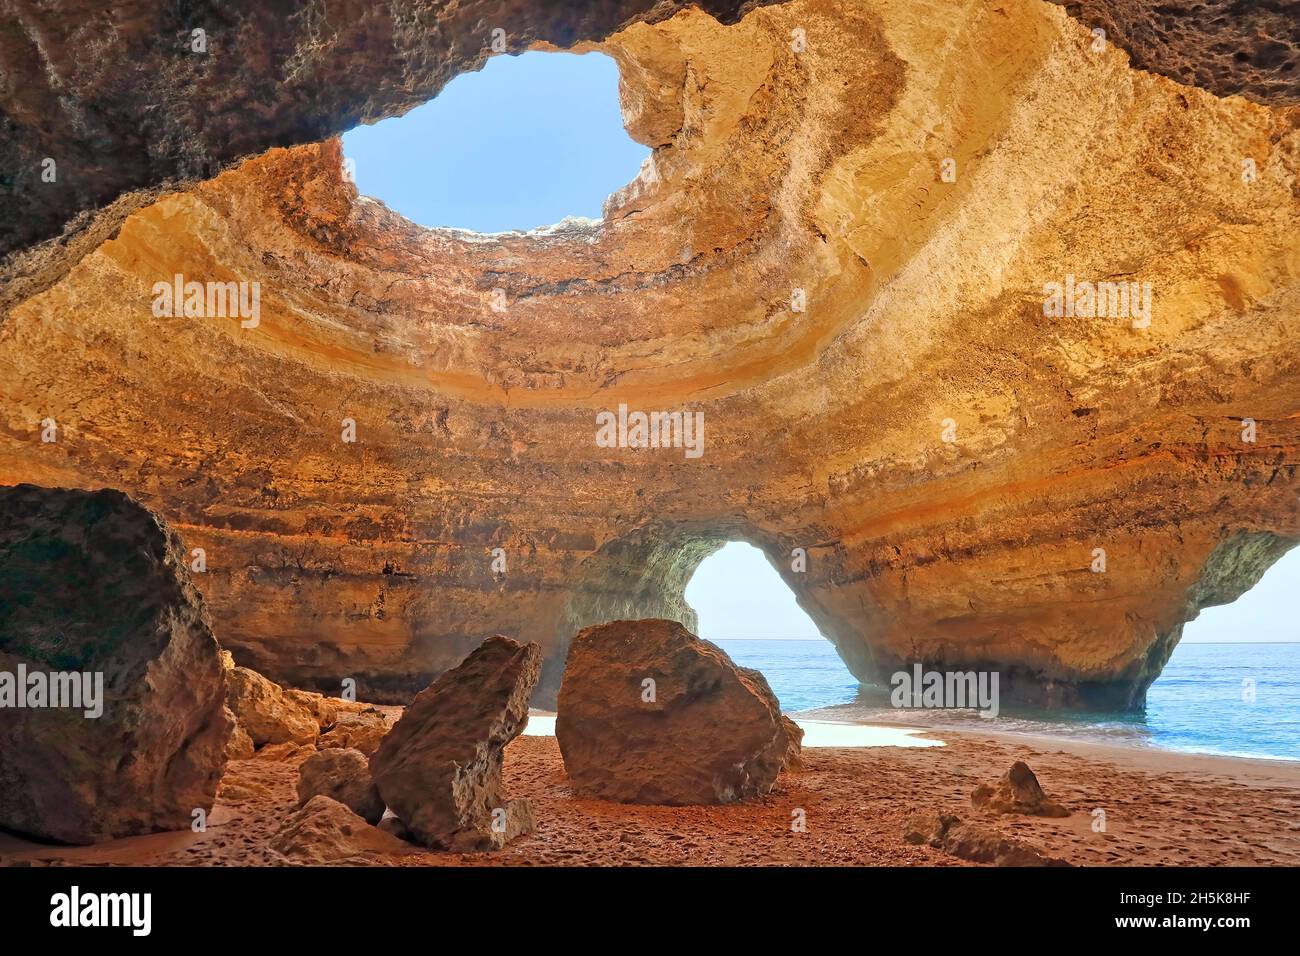 Sandstone rock formations at Benagil Cave, interior of sea cave along the ocean coast of the Algarve with sunlight shining through an opening Stock Photo